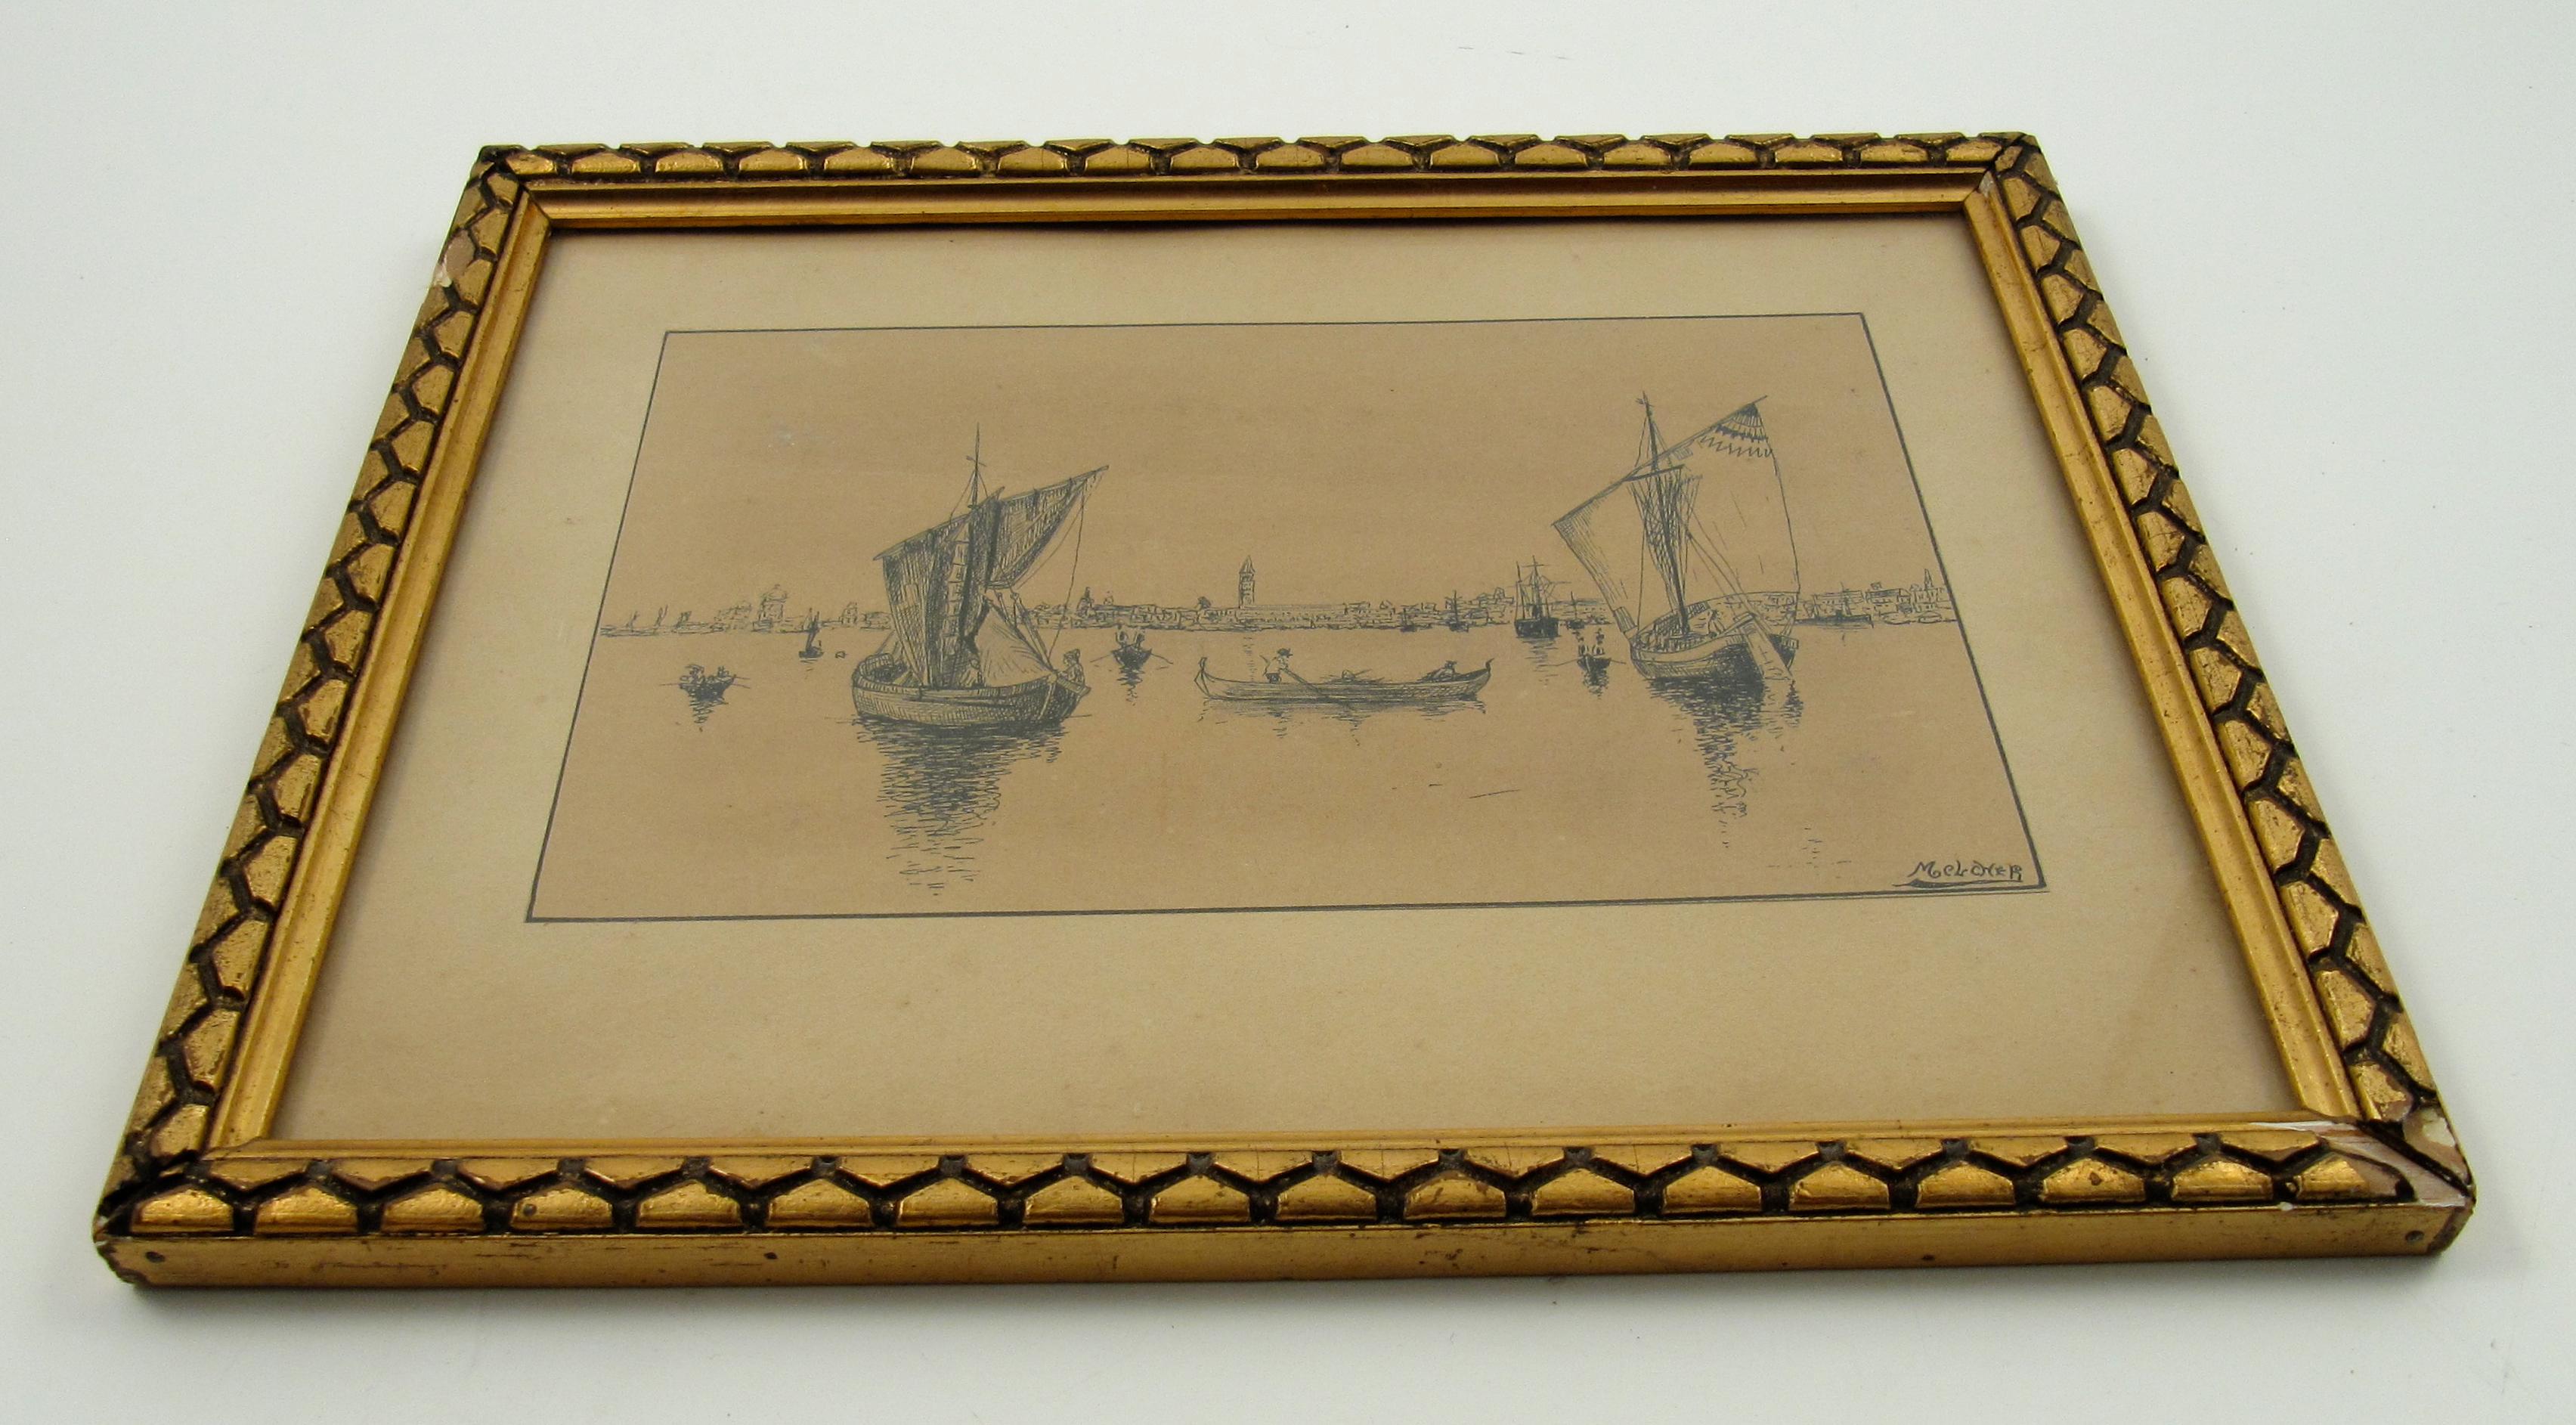 Gustav Melcher
(German, 1898-?)

Segelschiffe vor Venedig - Sailing ships off Venice

•	India ink, water colour wash
•	Visible image ca. 11.5 x 18 cm
•	Glased Frame ca. 20 x 25 cm
•	Verso various inscriptions
•	Signed lower right

Worldwide shipping